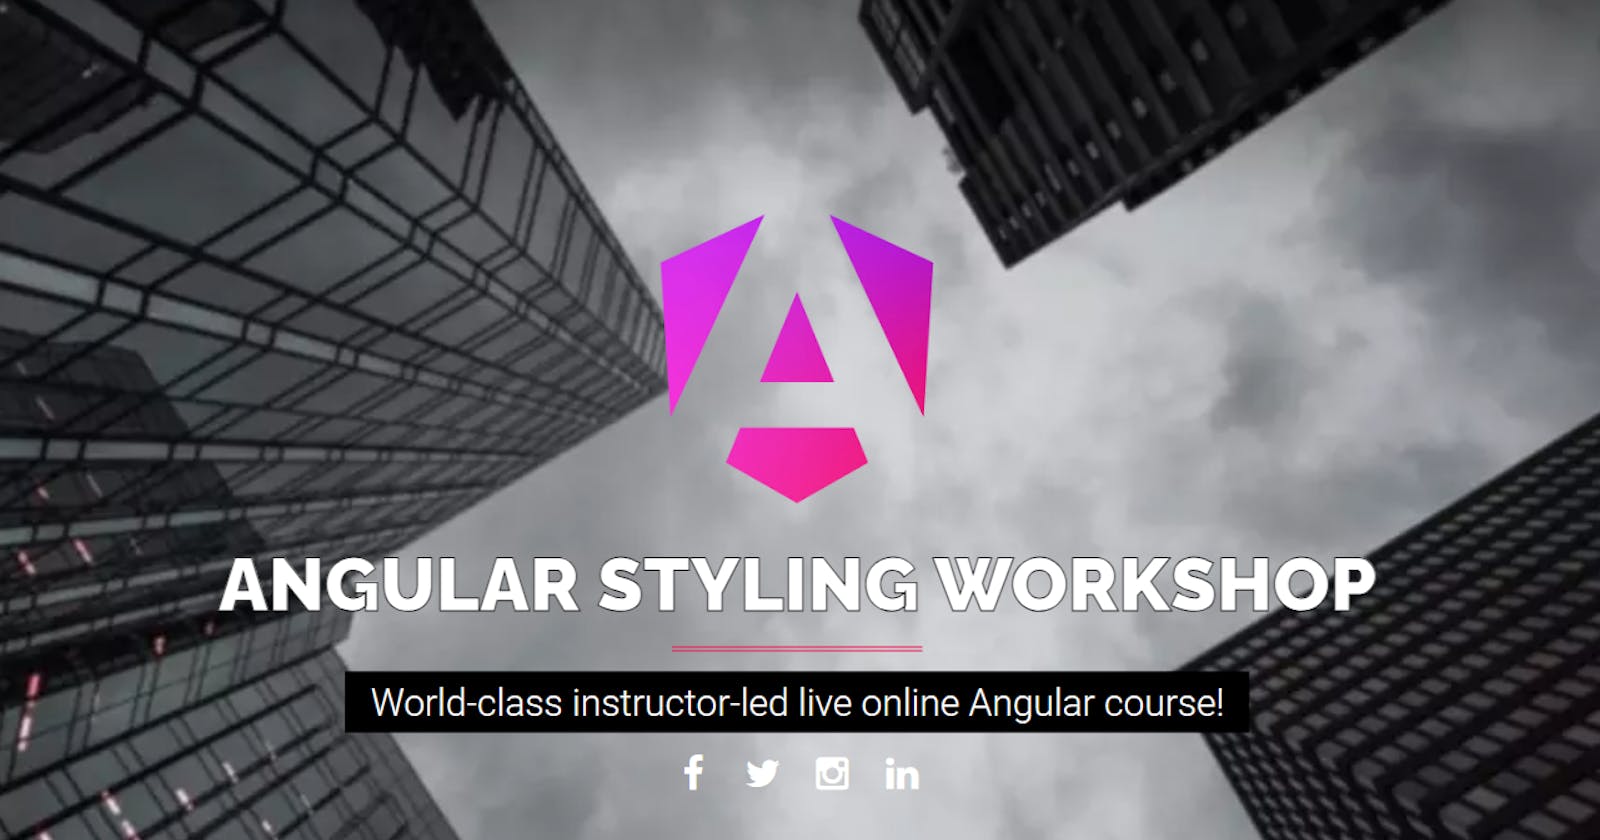 Introducing a new workshop... for CSS in Angular!